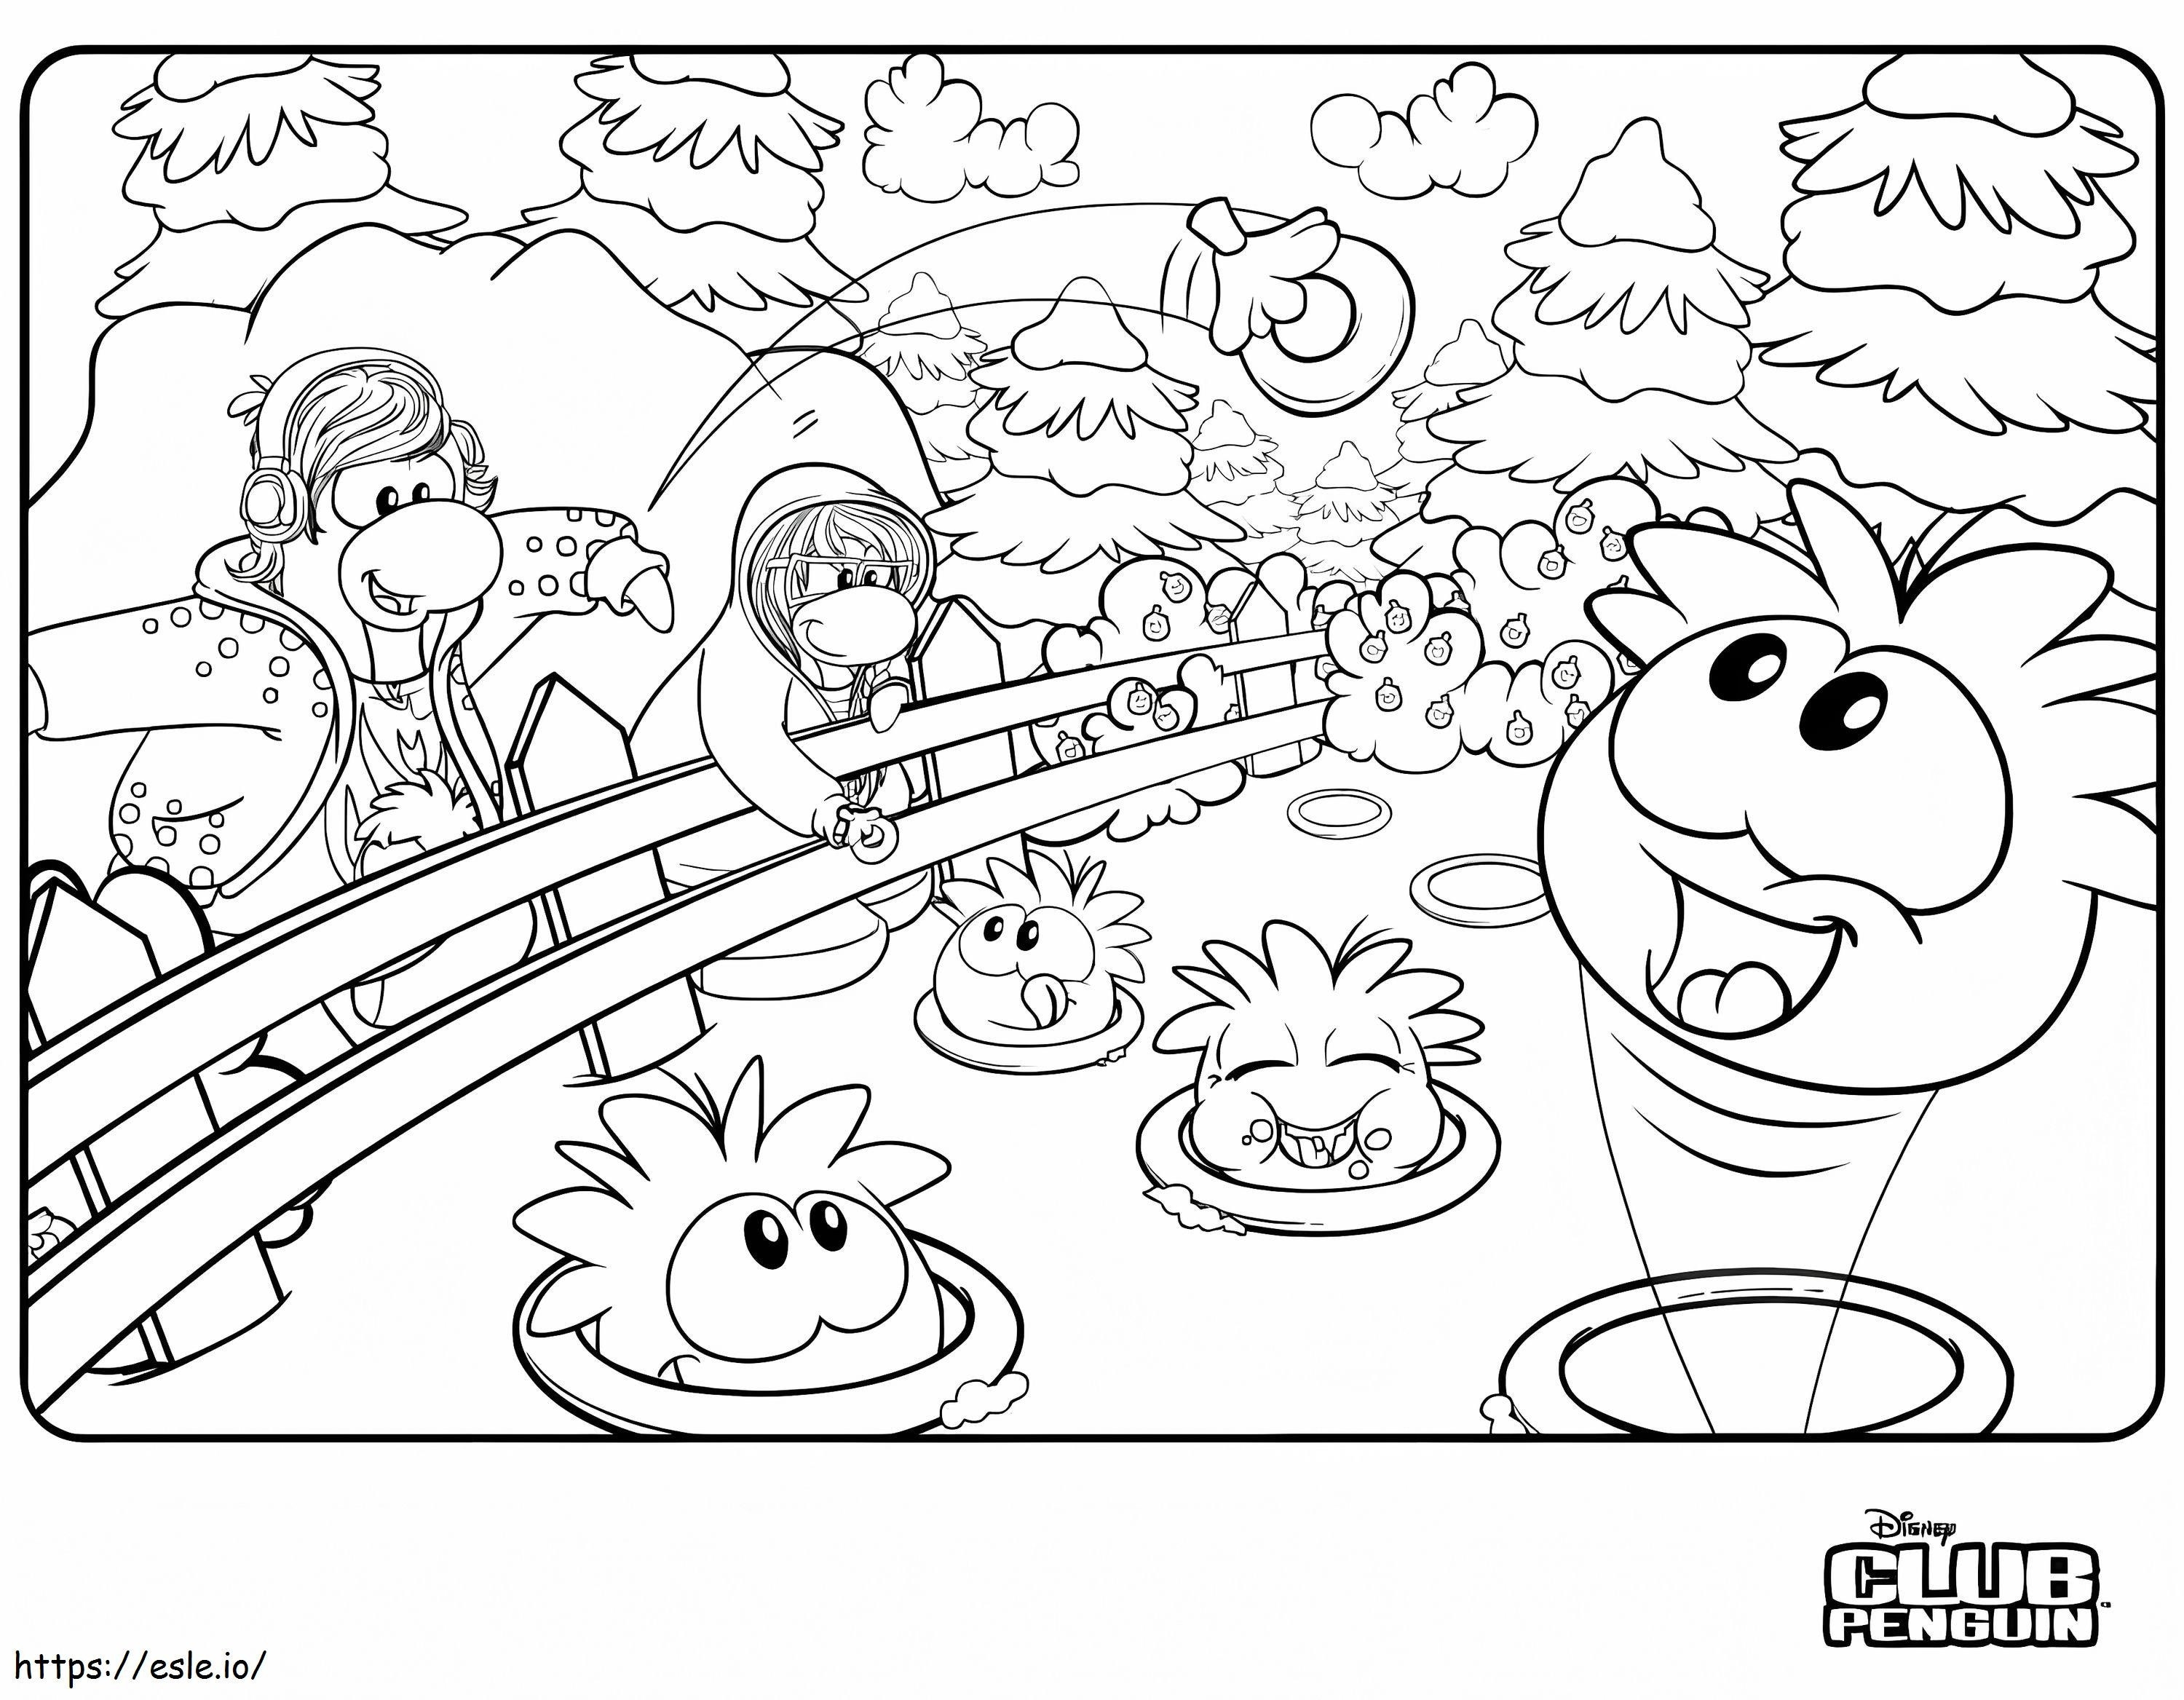 Free Club Penguin To Print coloring page